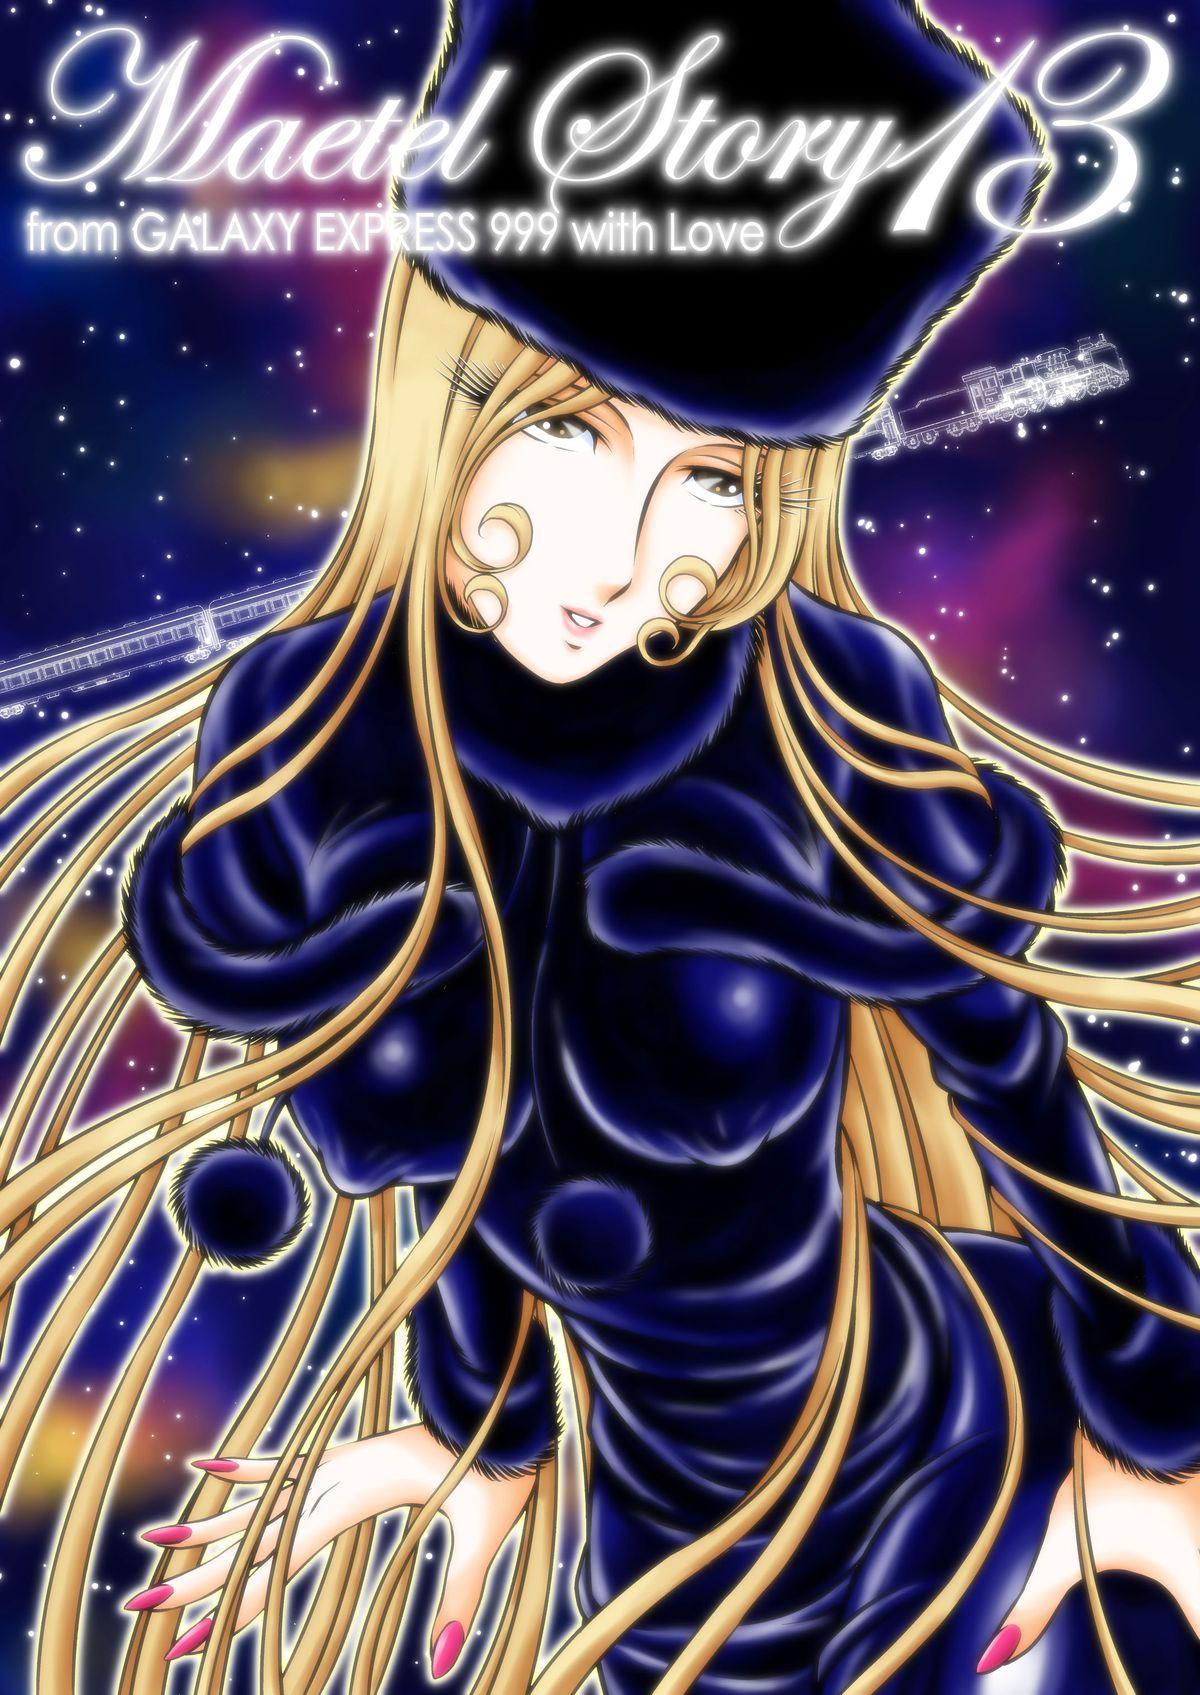 Real Amateurs Maetel Story 13 - Galaxy express 999 Rabuda - Picture 1